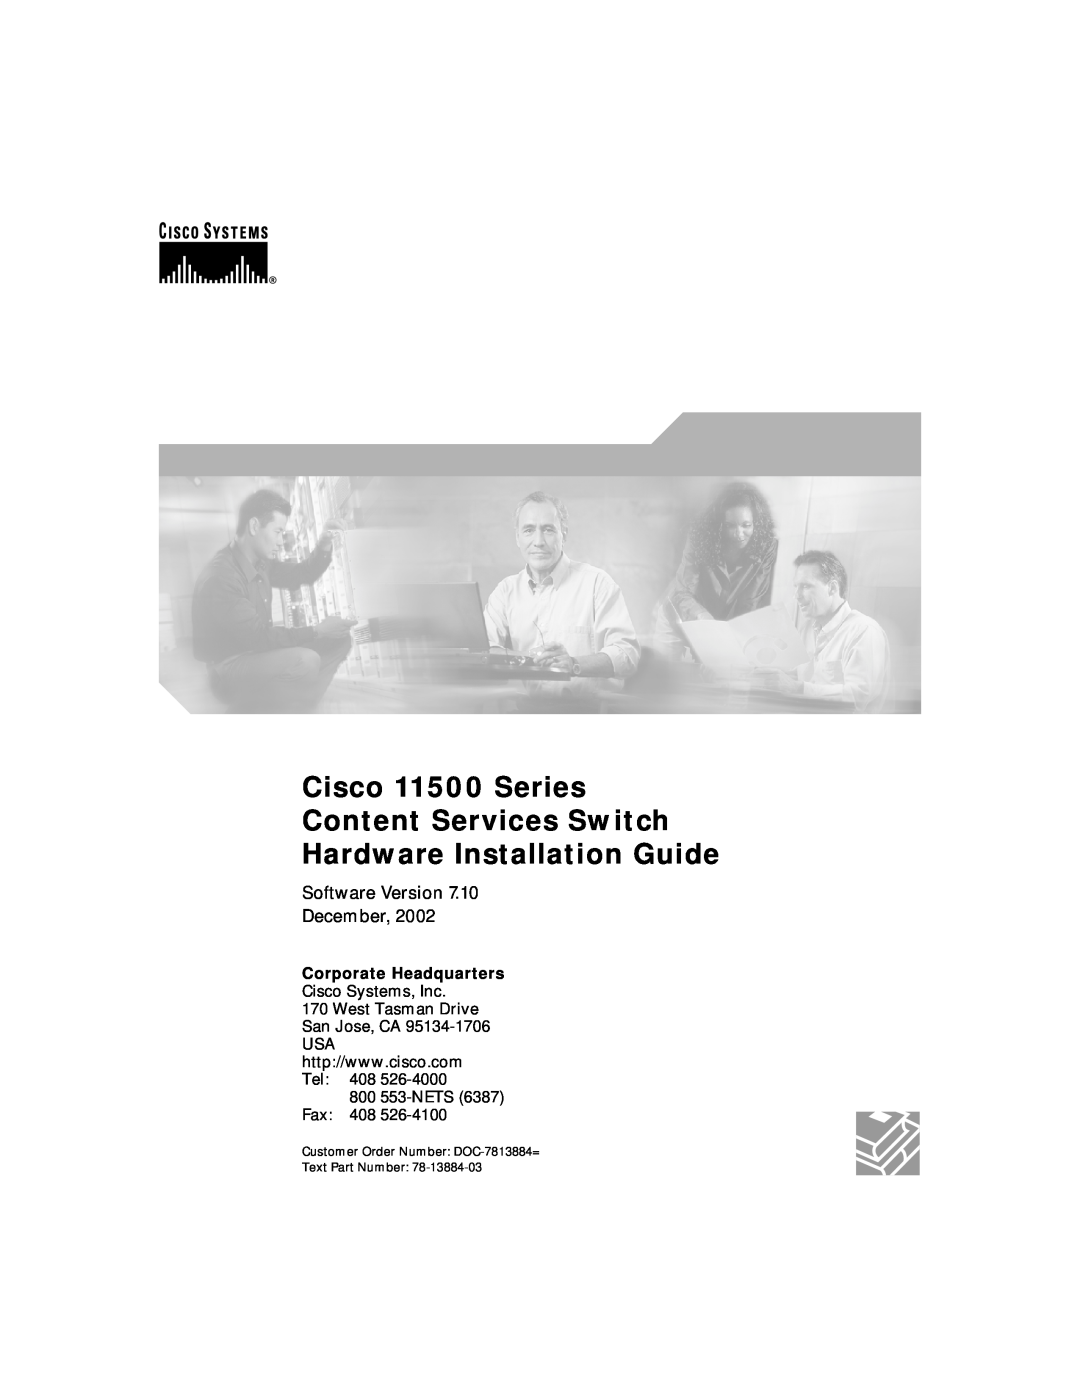 Cisco Systems manual Cisco 11500 Series Content Services Switch, Hardware Installation Guide, Software Version July 